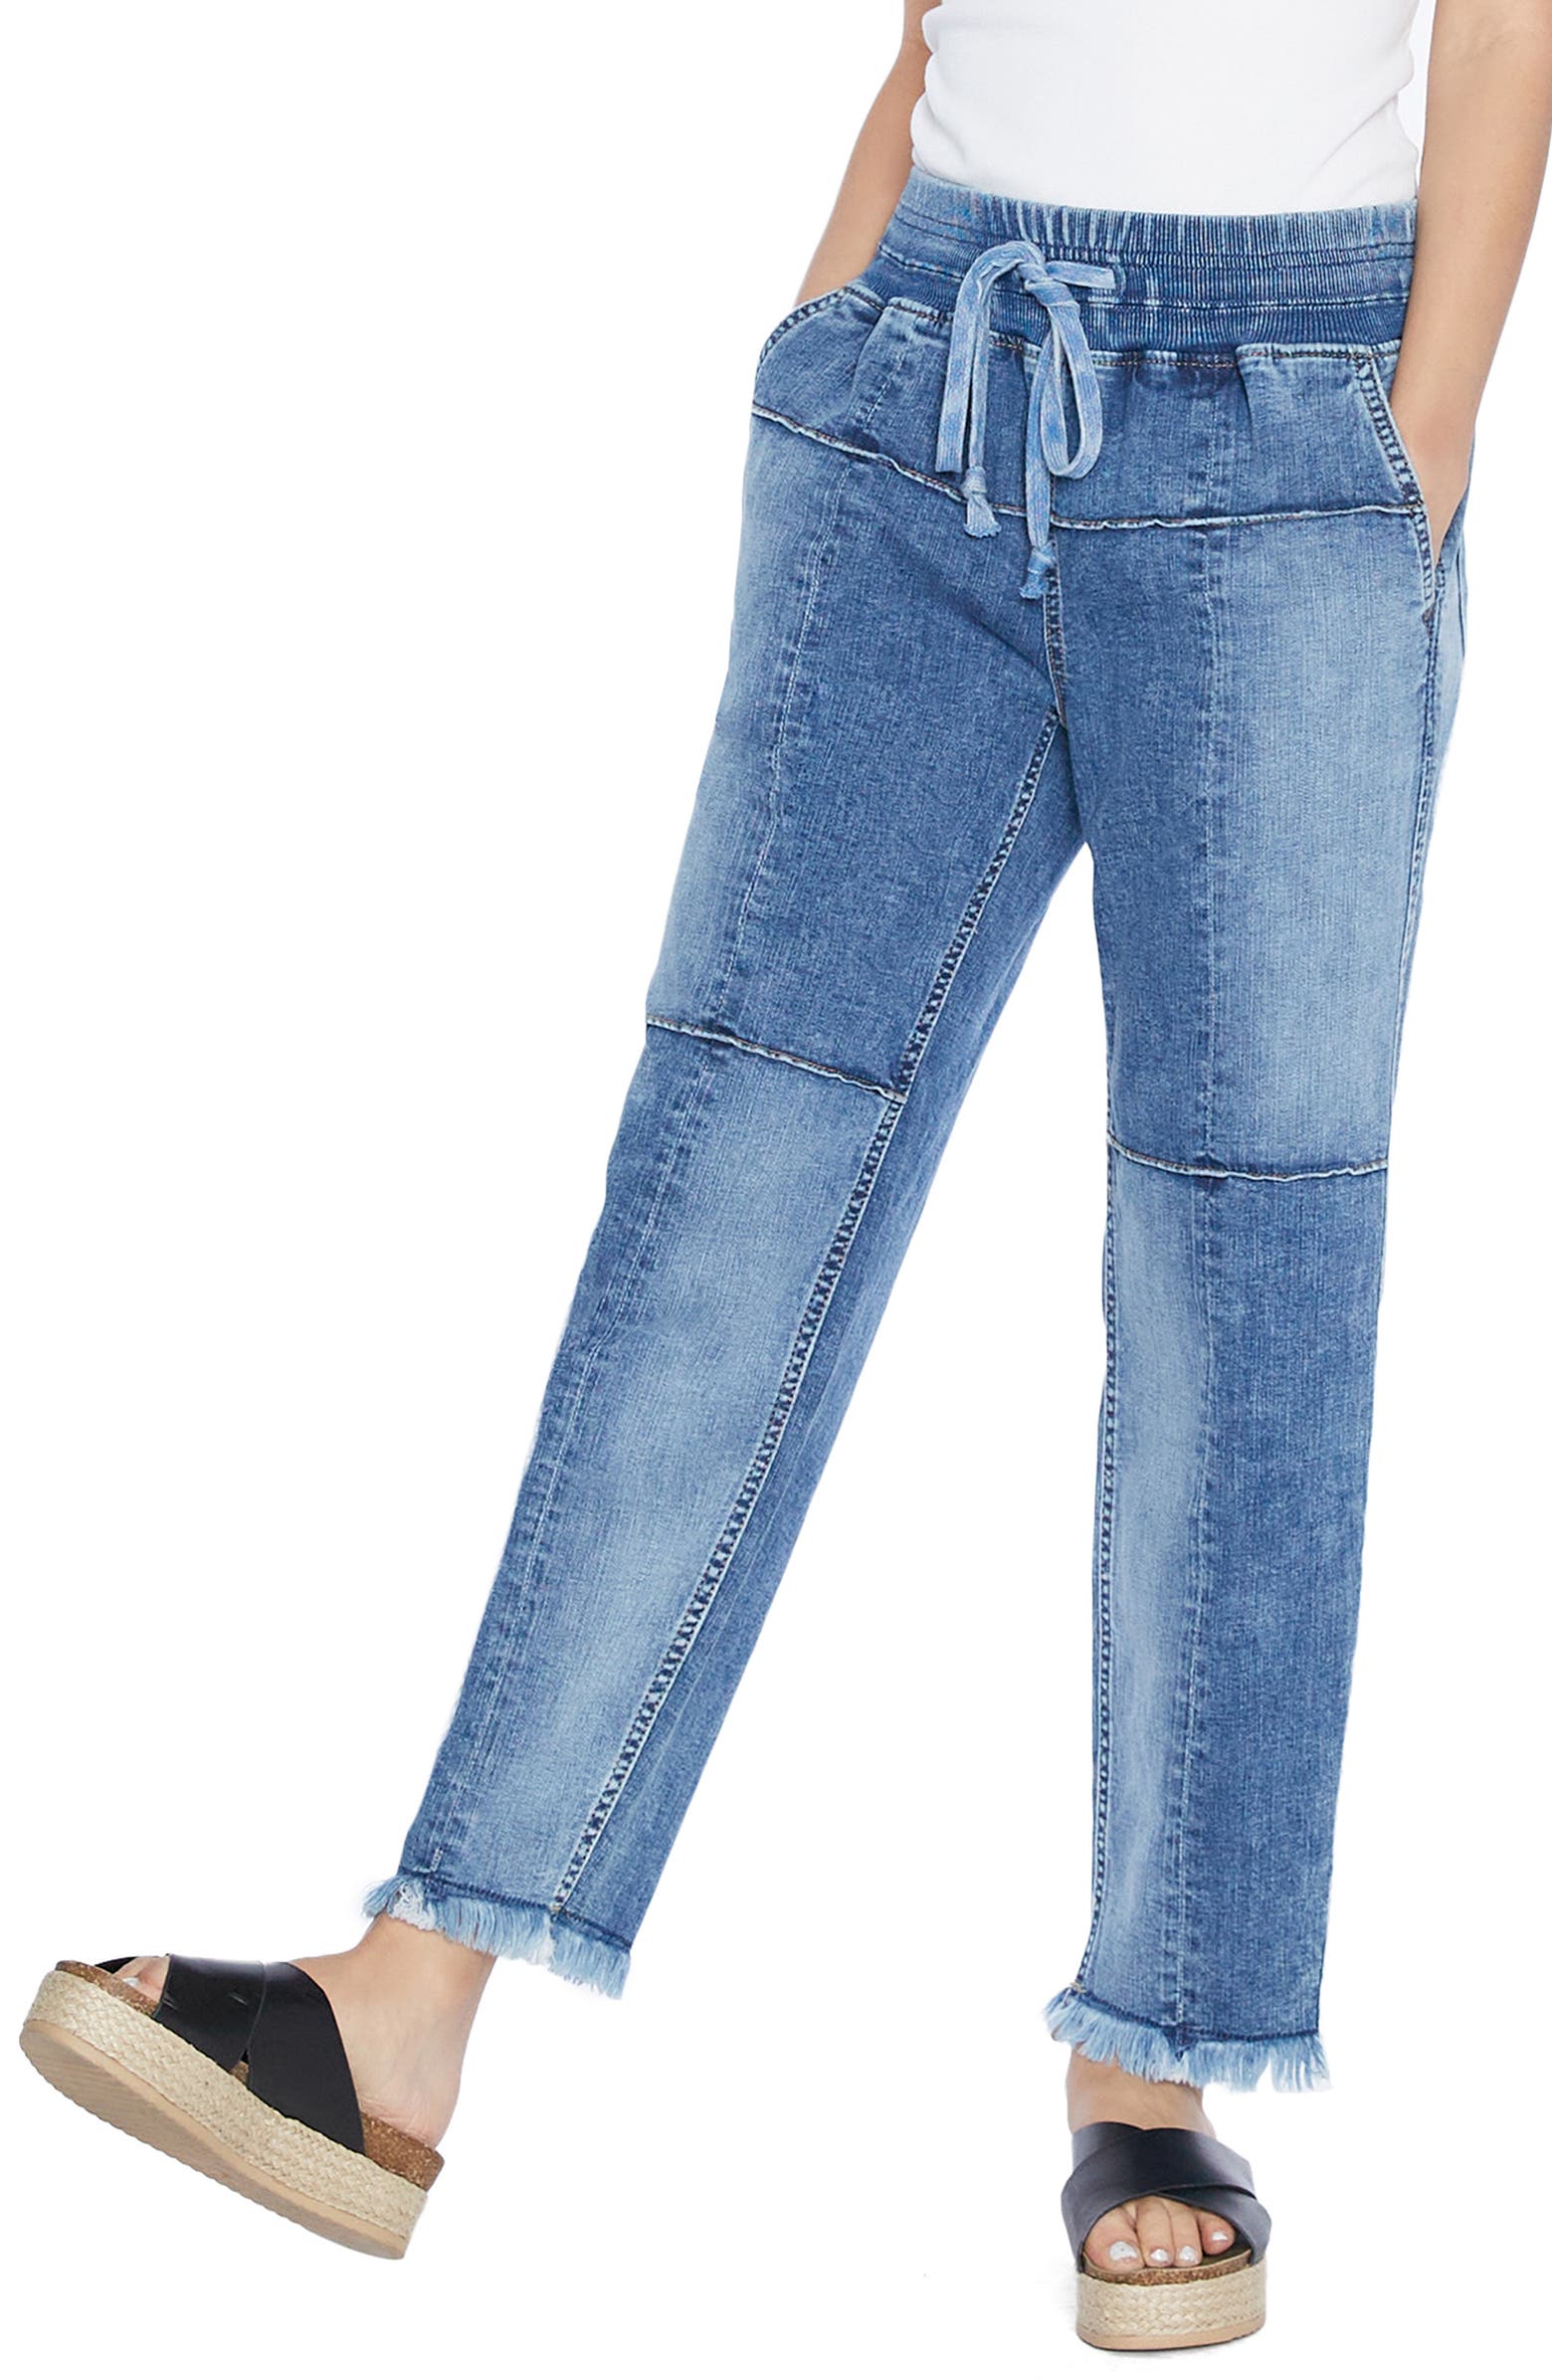 Wash Lab Denim Wash Lab Pieced Relaxed Fit Jeans | Nordstrom